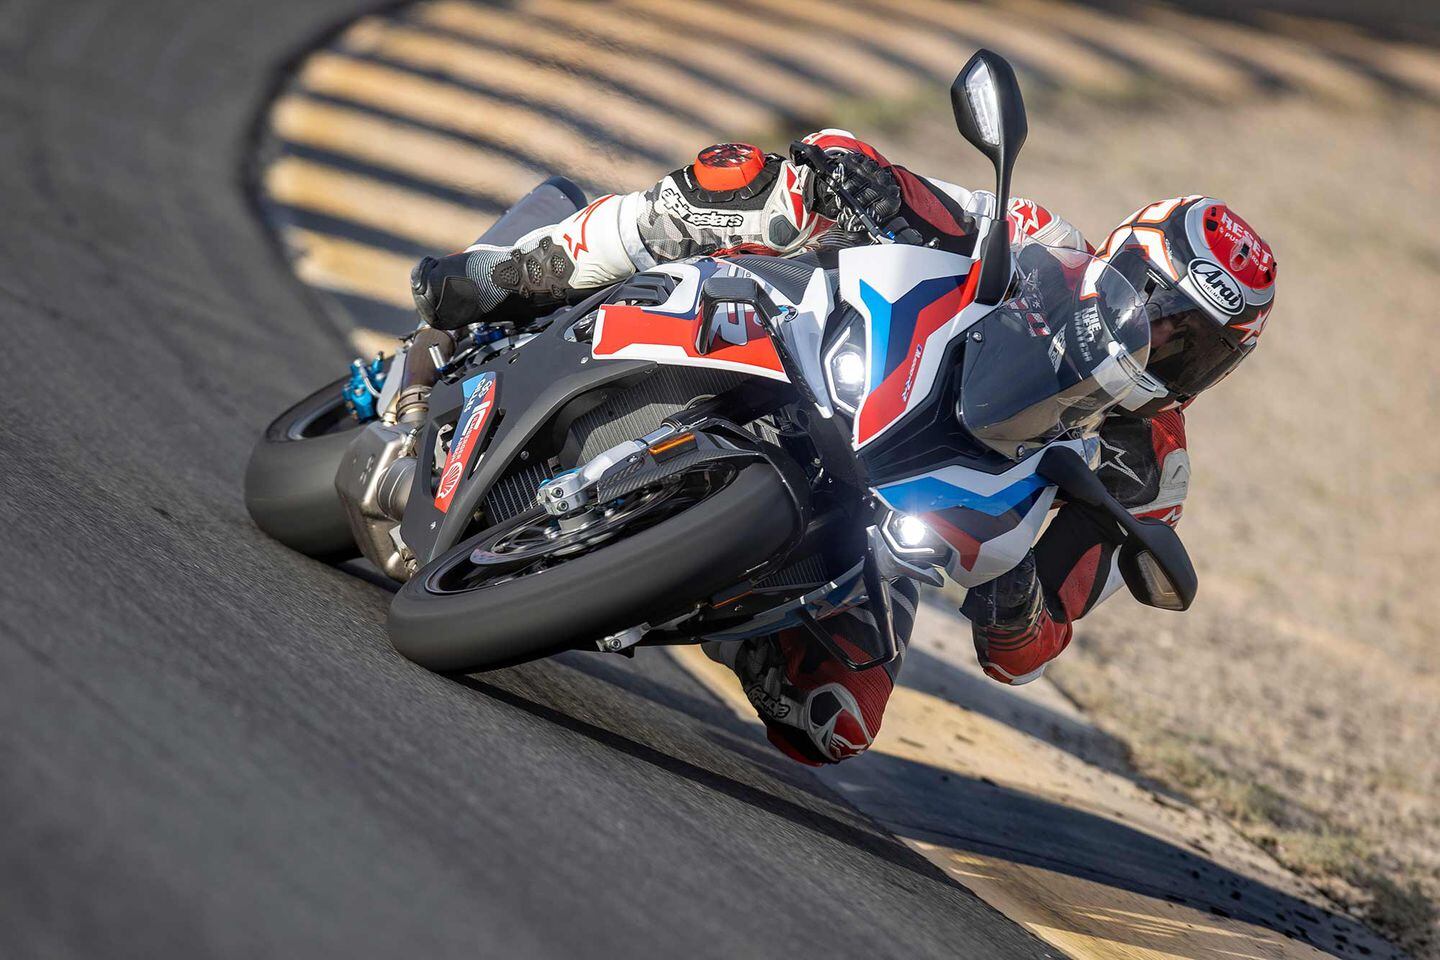 2021 BMW M 1000 RR First Ride Review